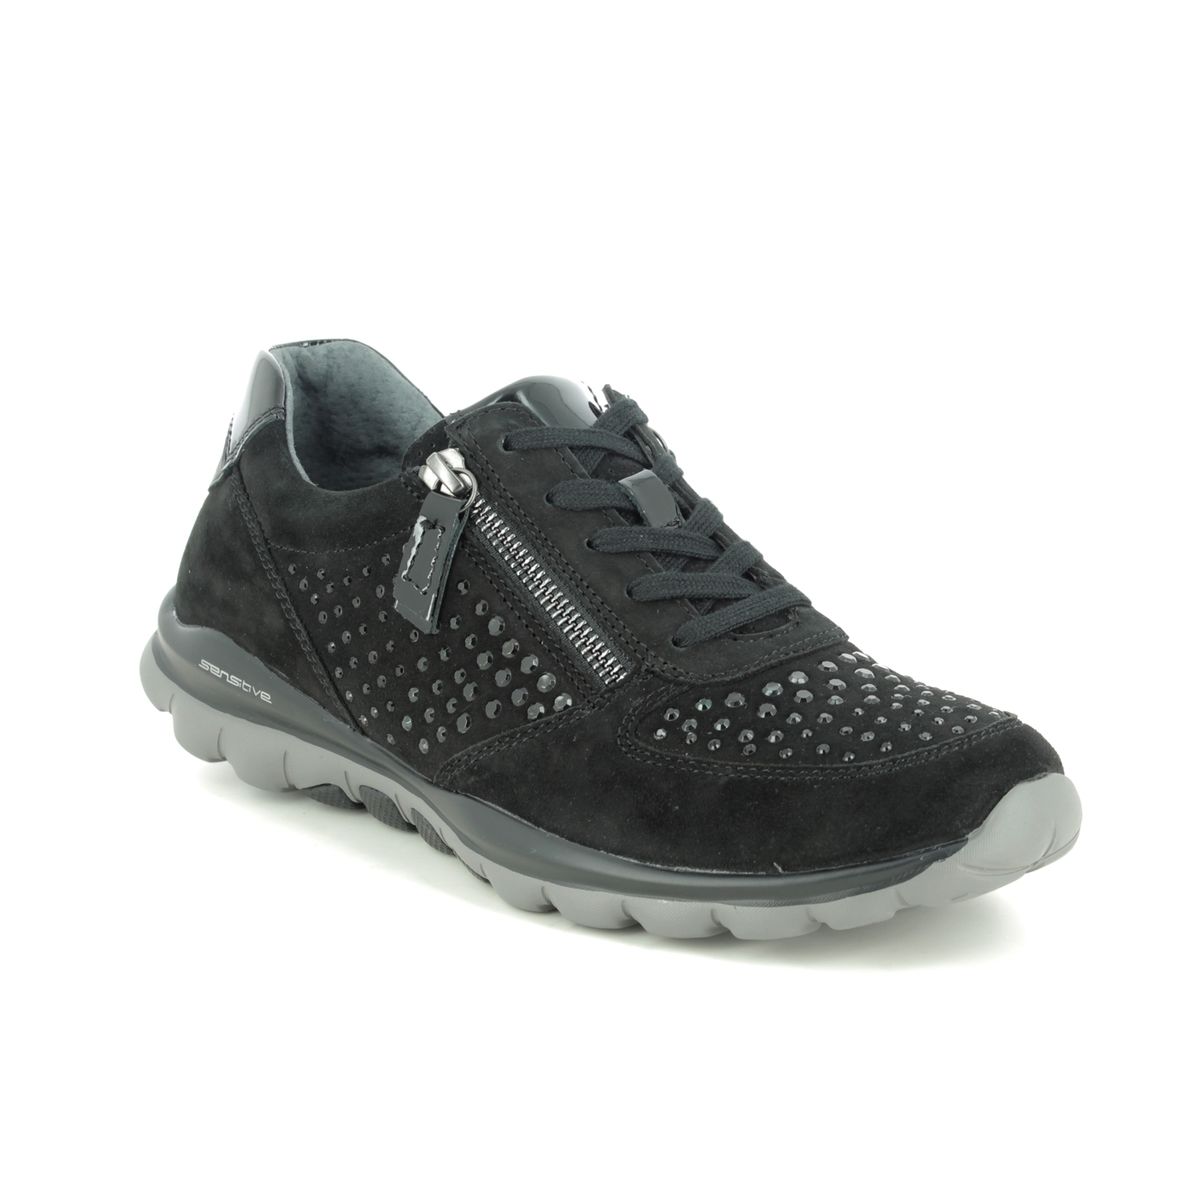 Gabor Fantastic Sparkle Black nubuck Womens lacing shoes 96.968.87 in a Plain Leather in Size 5